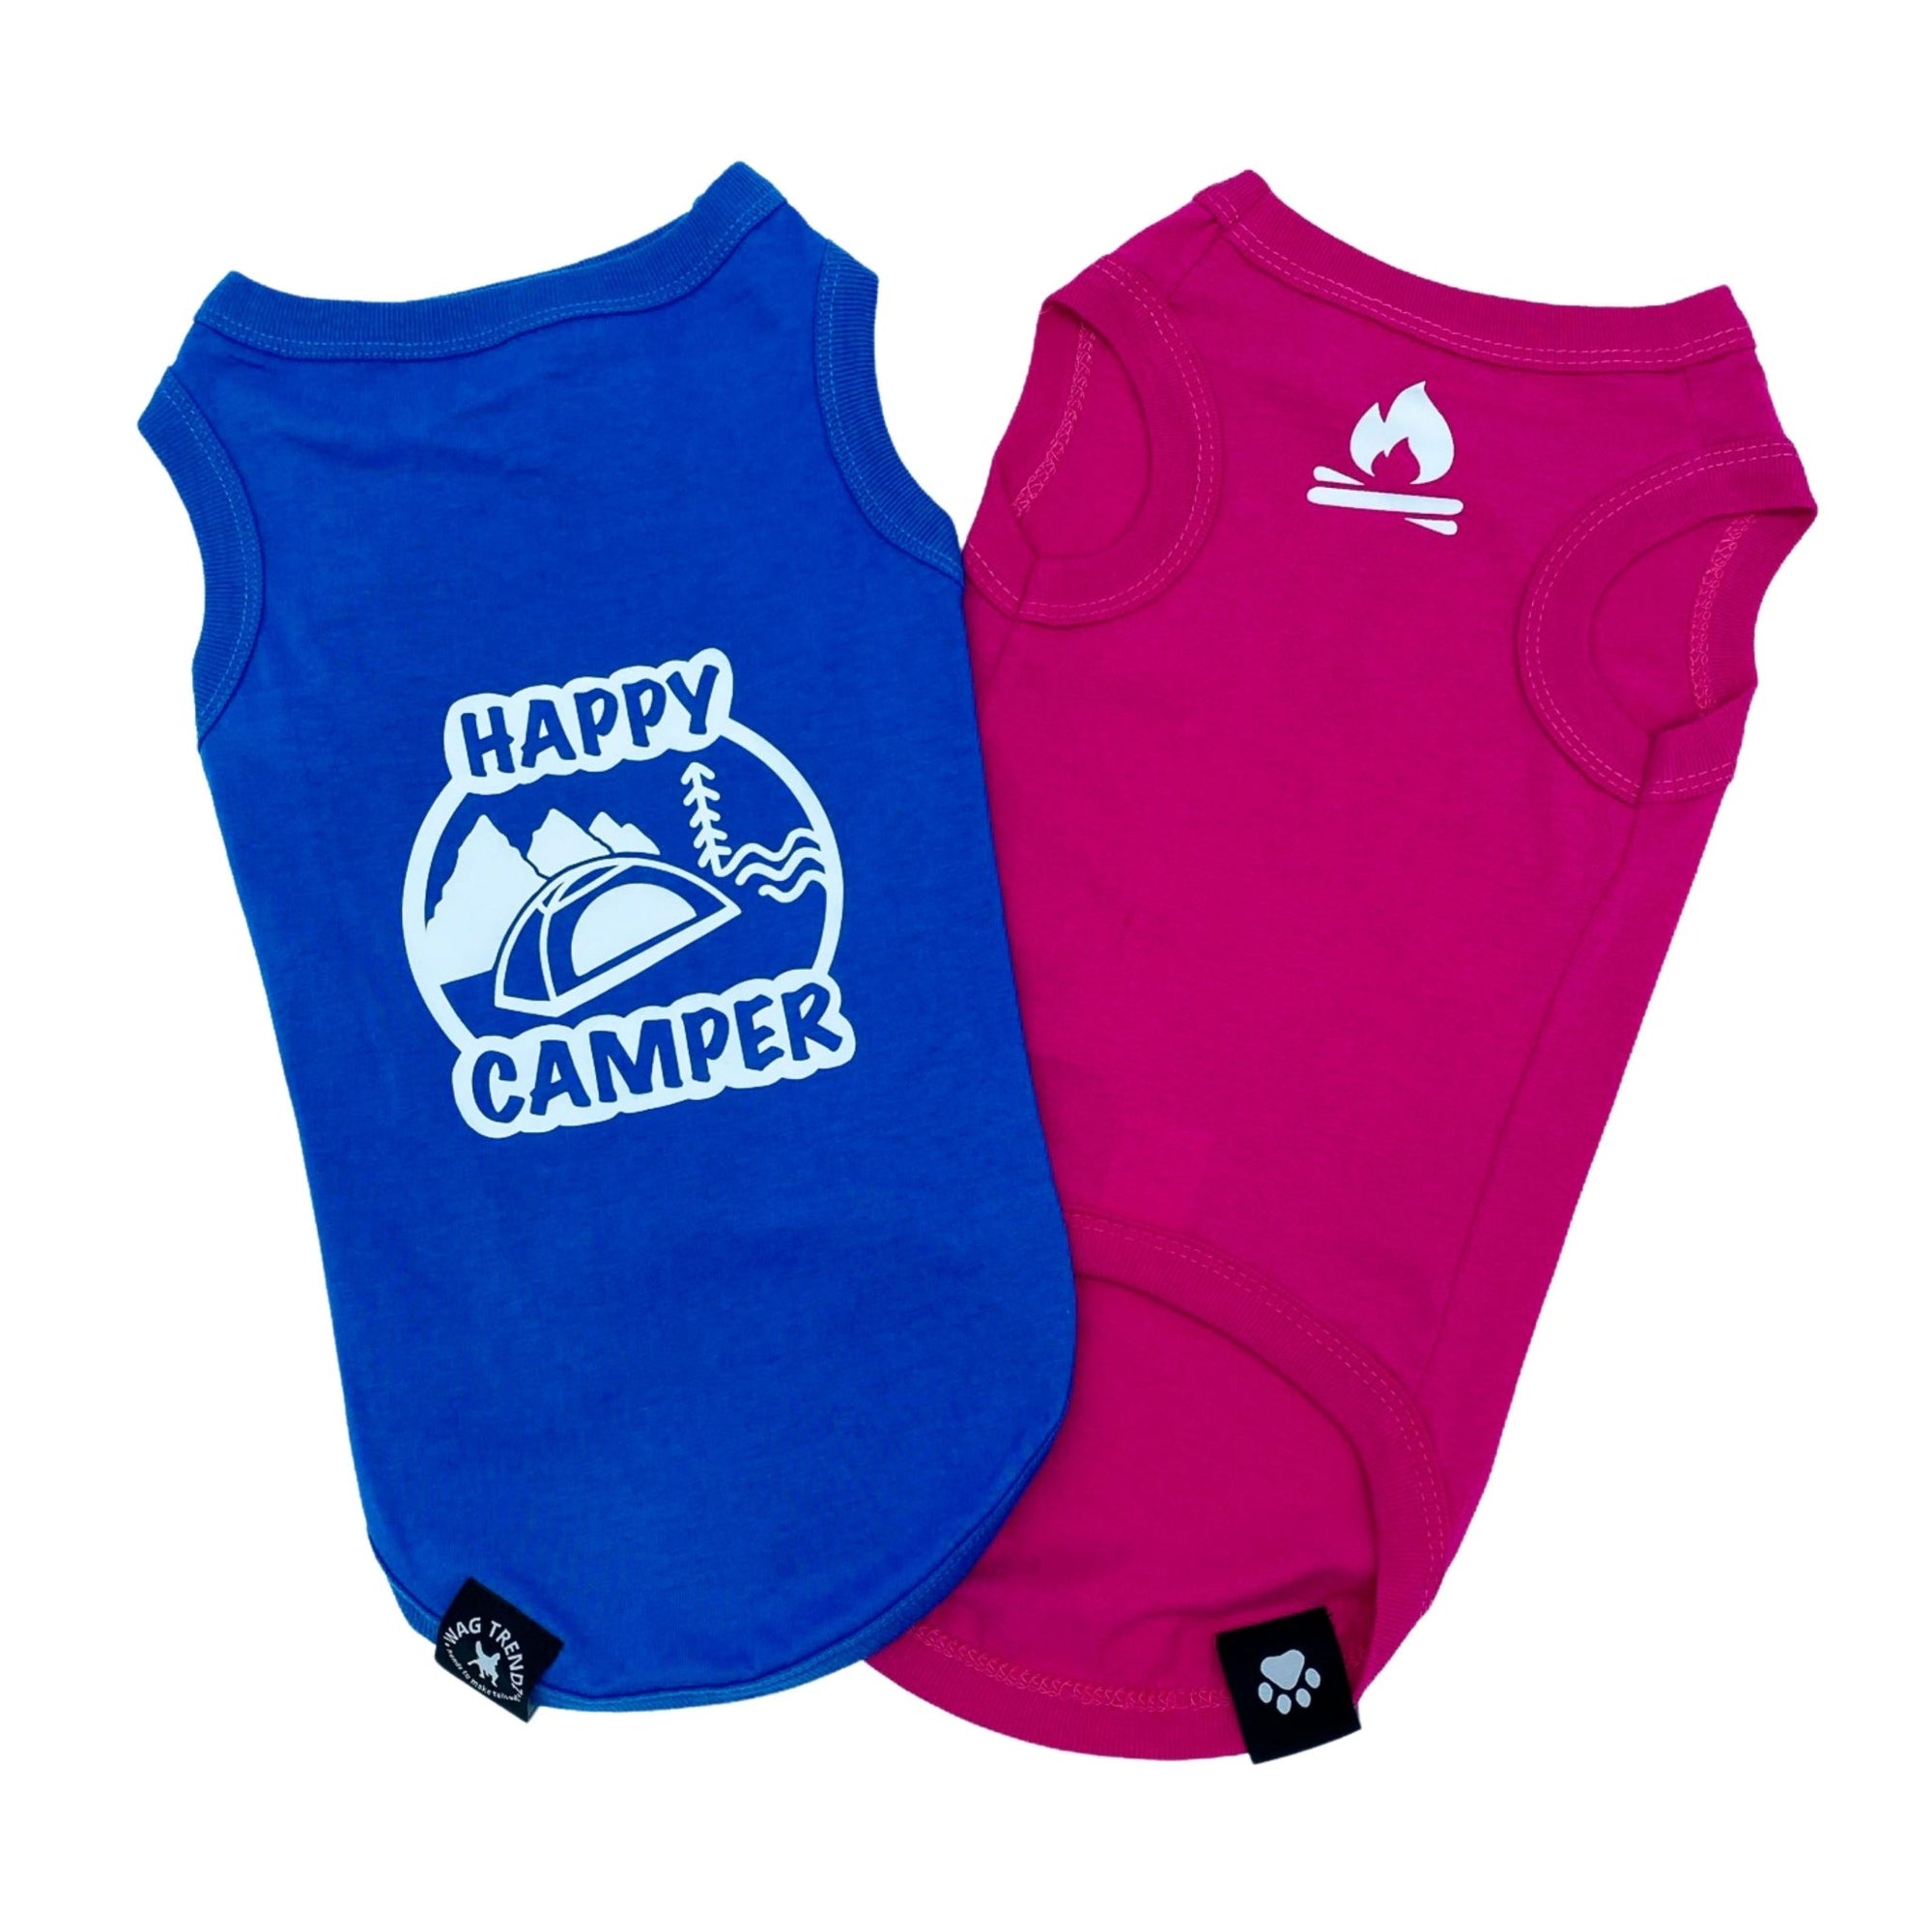 Dog T-Shirt - &quot;Happy Camper&quot; dog t-shirt - Hot Pink and Royal Blue - back view with Happy Camper and camping scene while pink t-shirt is chest view with campfire emoji - against solid white background - Wag Trendz